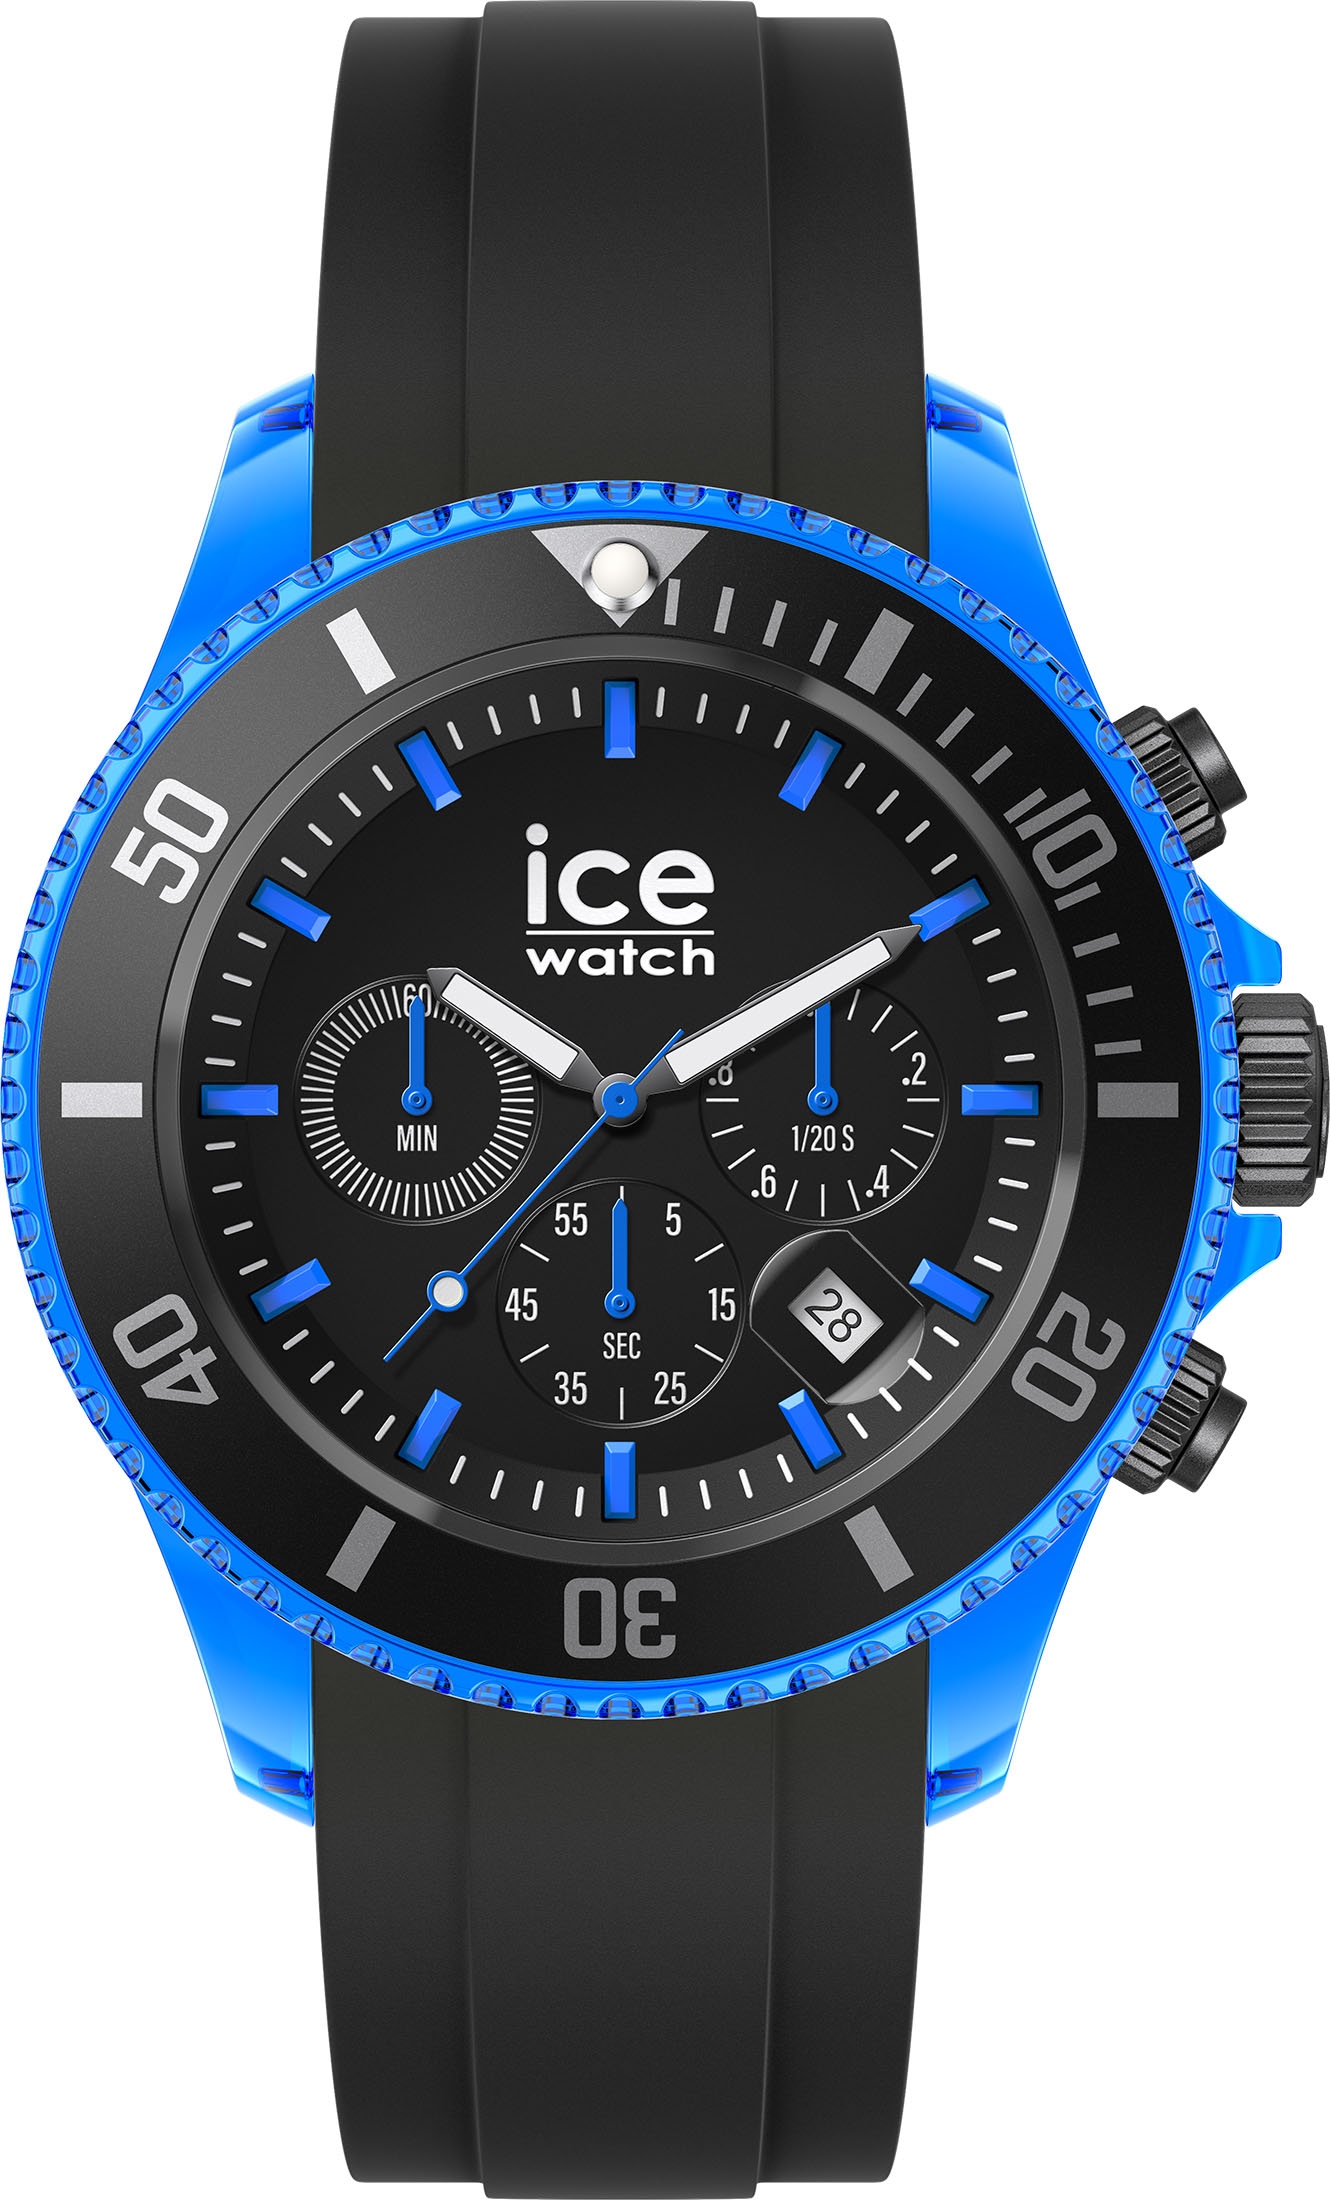 ice-watch Chronograph »ICE chrono - blue online - large Extra - shoppen bei CH, 019844« OTTO Black